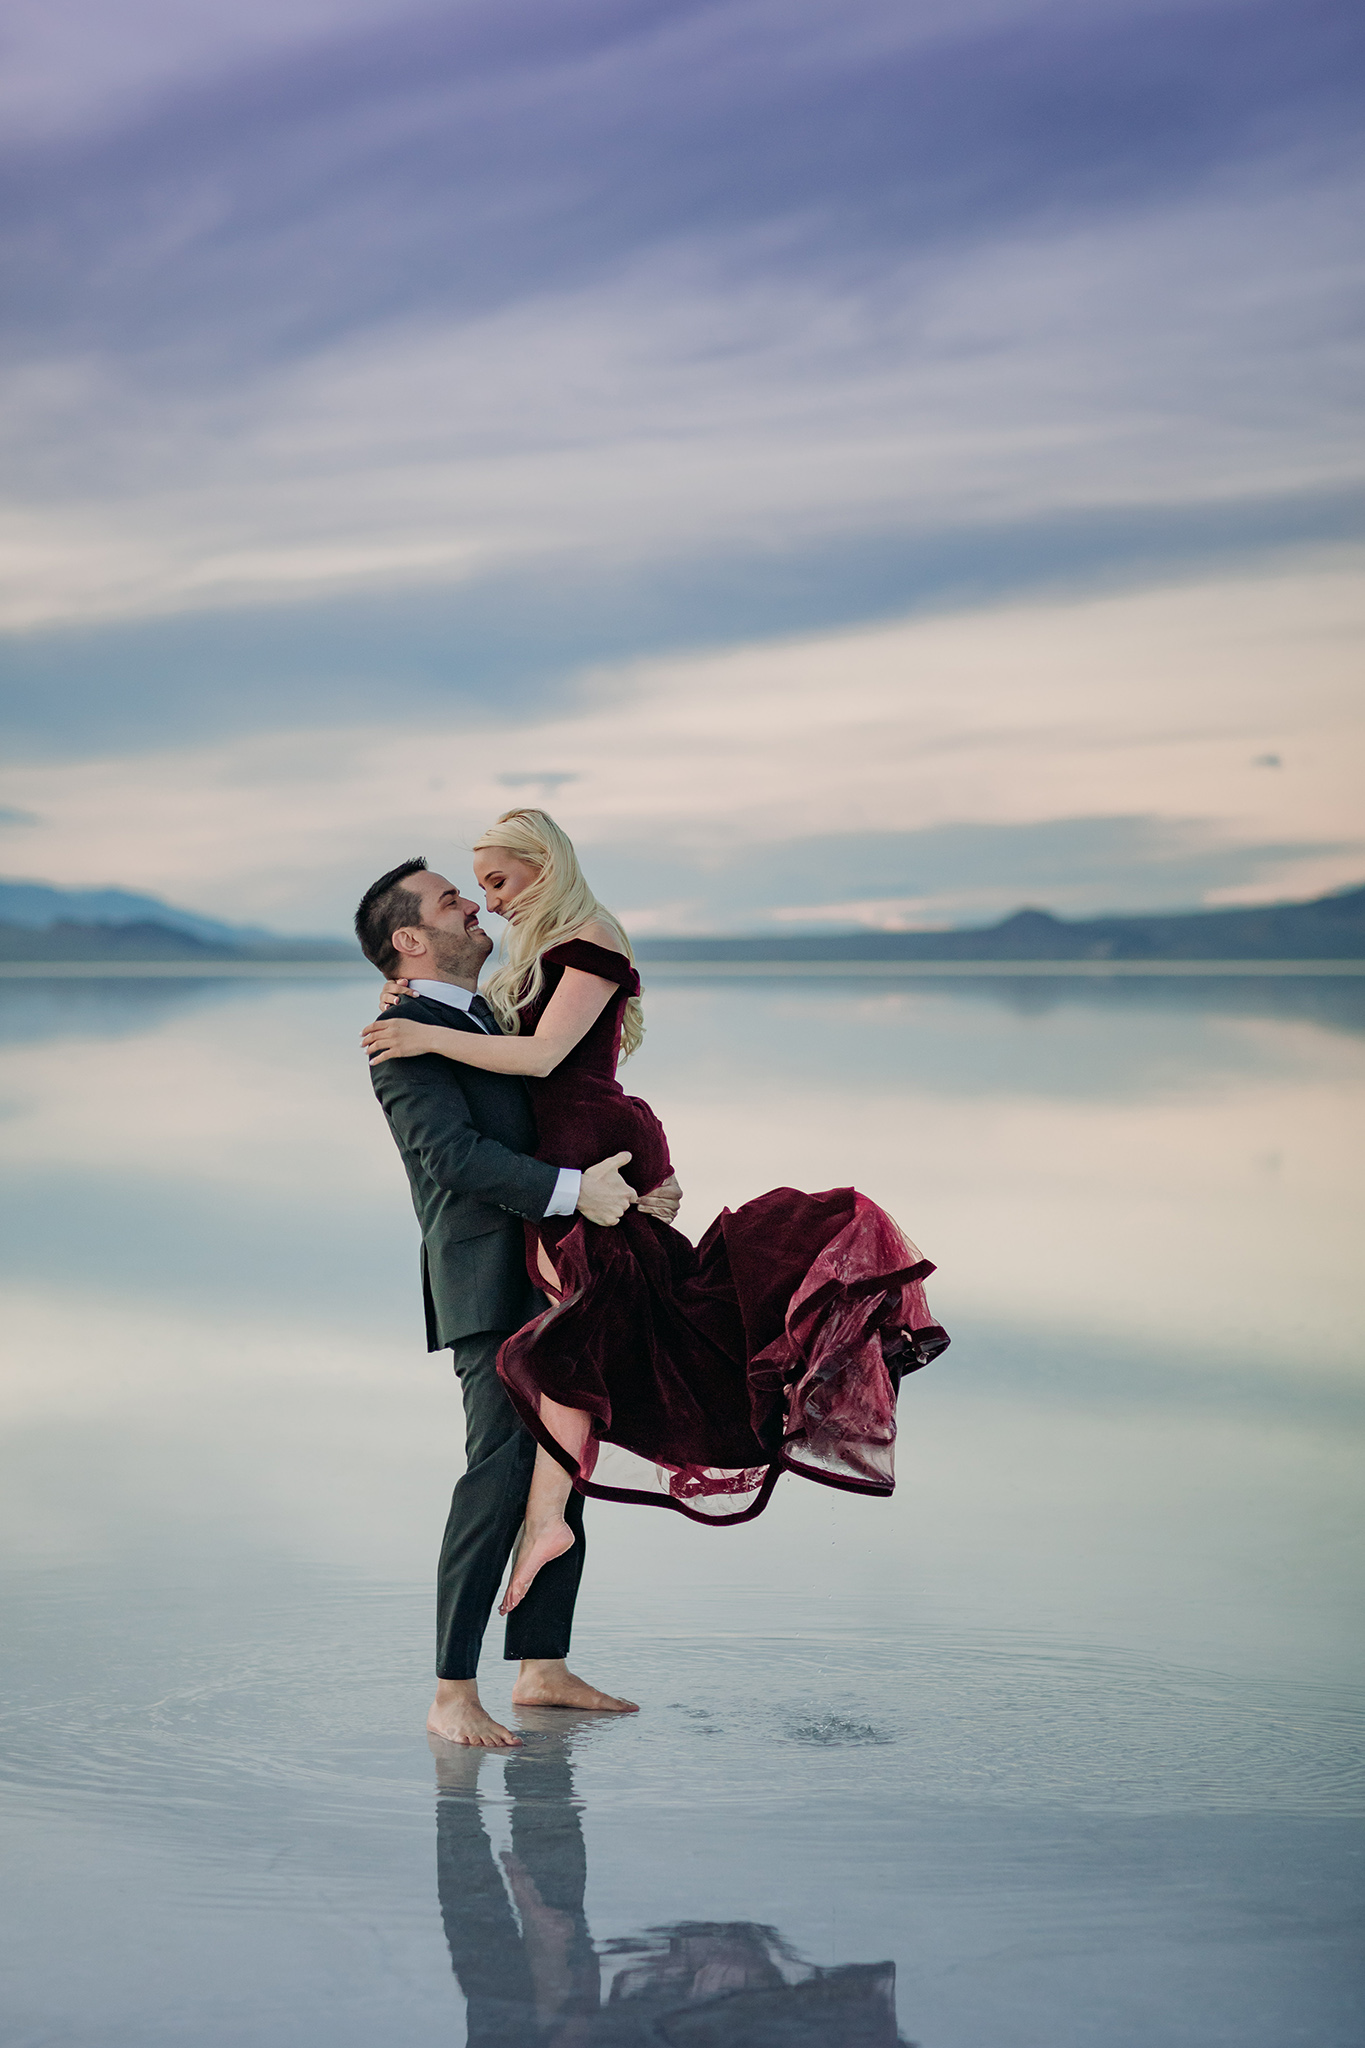 dancing in the water mirror reflections mountain views at sunset in Utah Bonneville Salt Flats